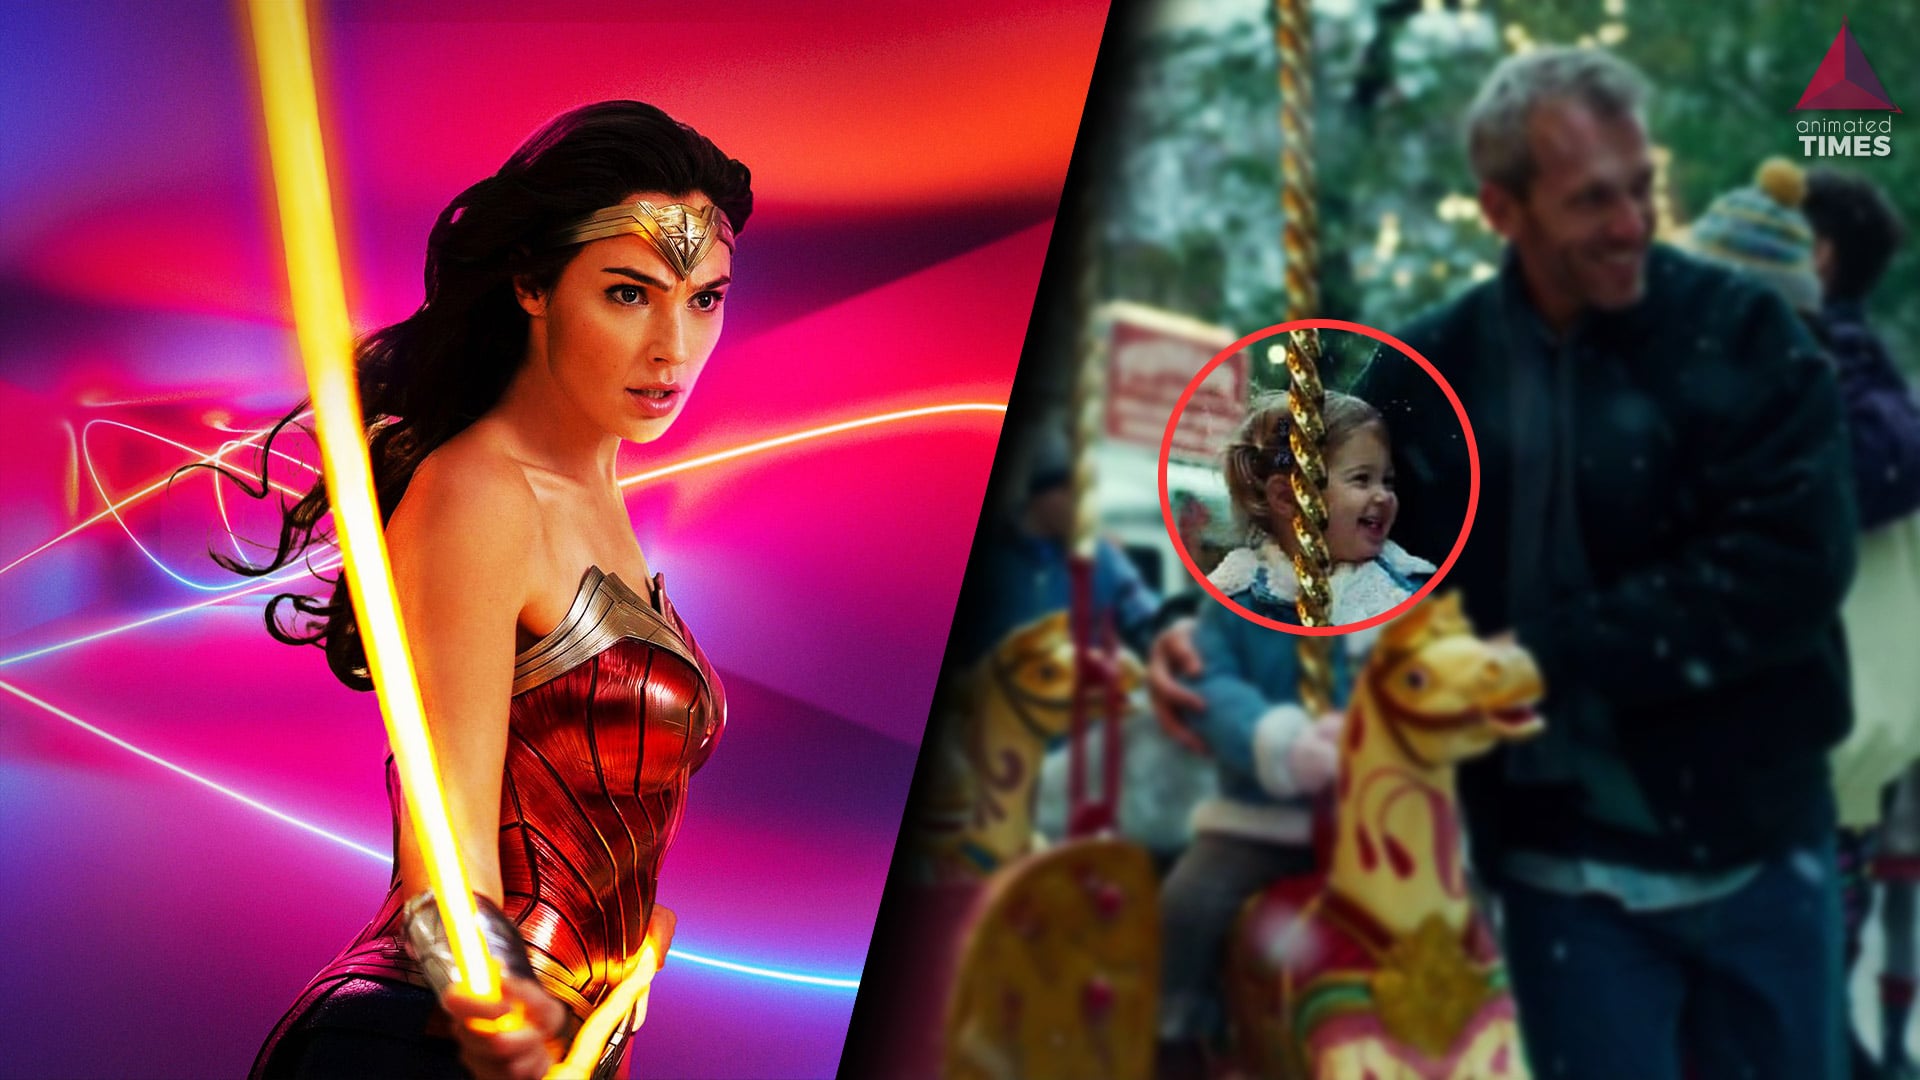 Wonder Woman 1984: Did You Catch The Sweet Cameo of Gal Gadot’s Real Family?